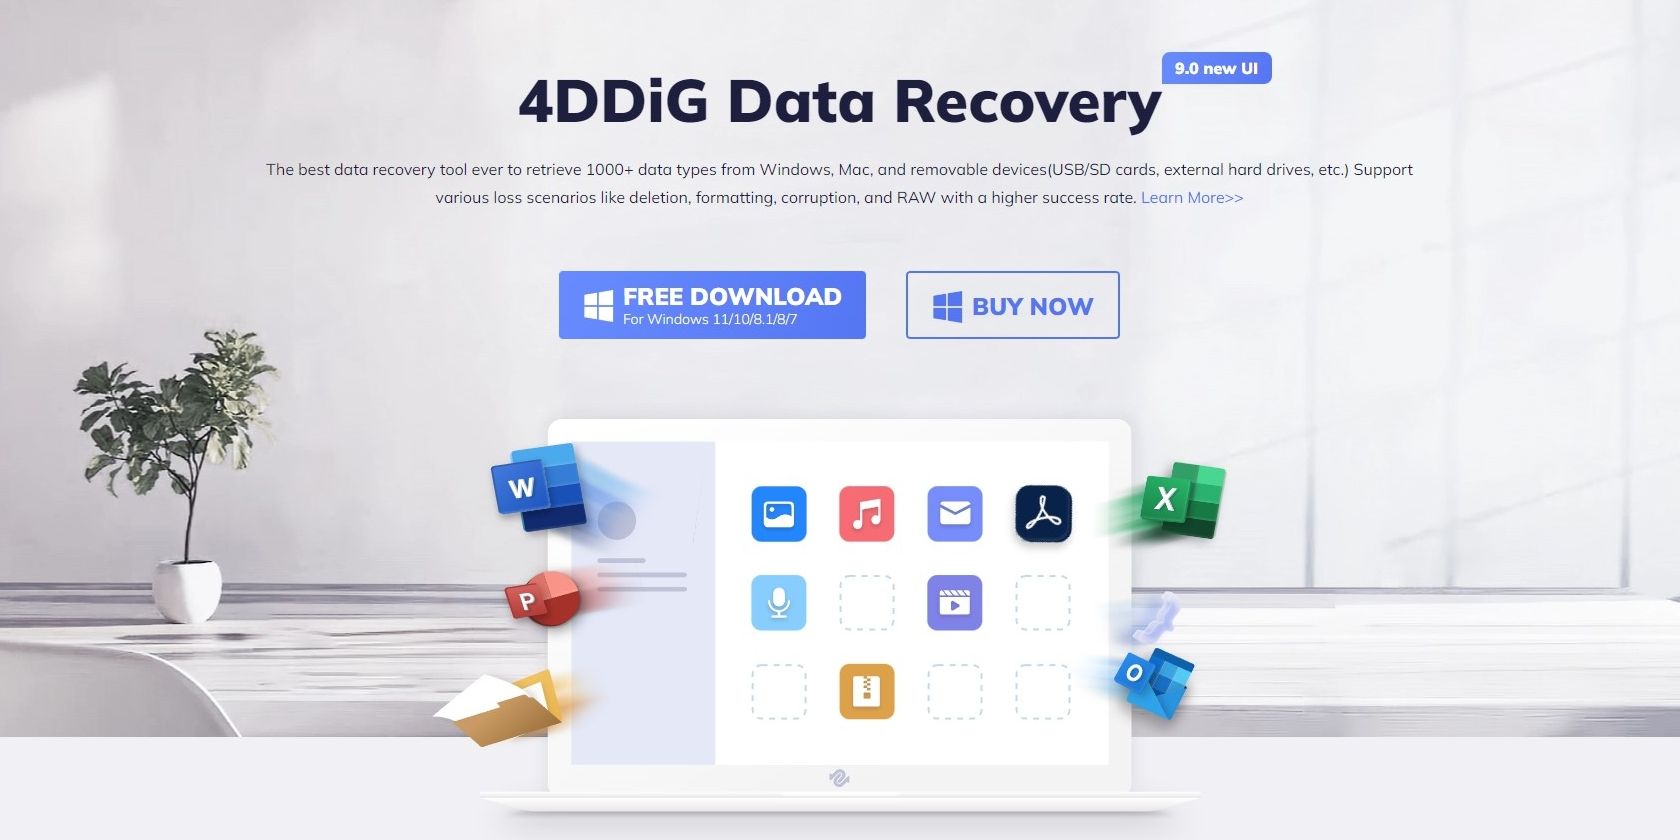 4ddig data recovery website